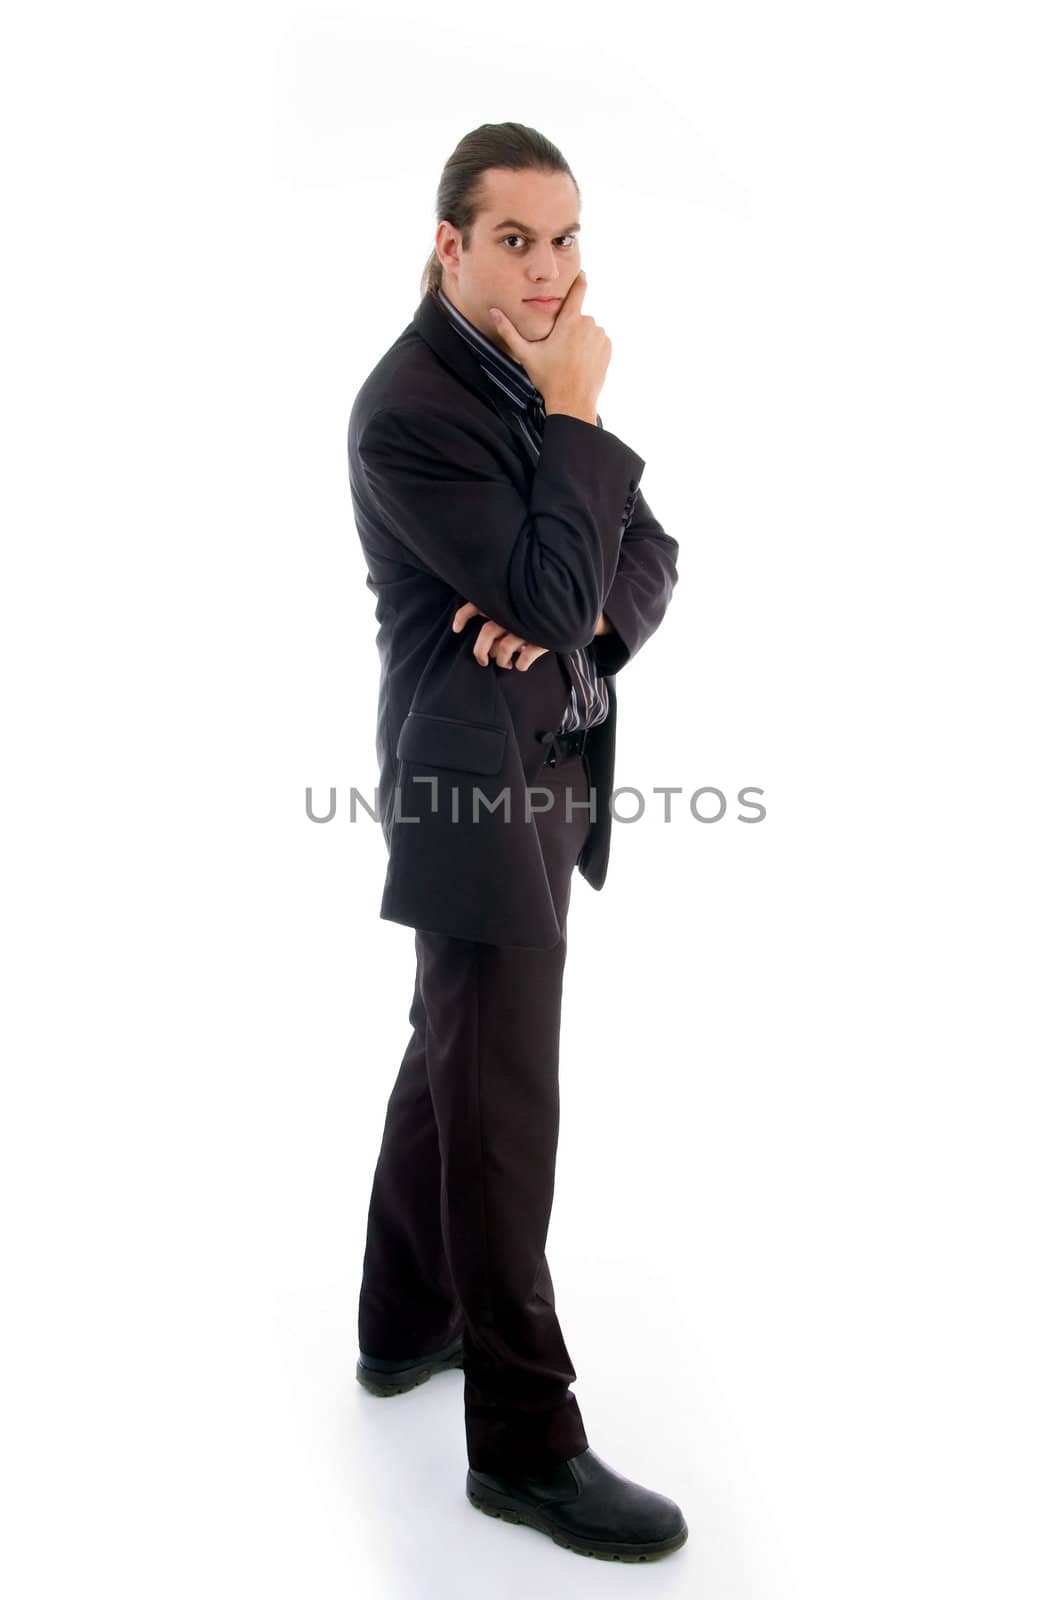 full pose of young executive on an isolated white background